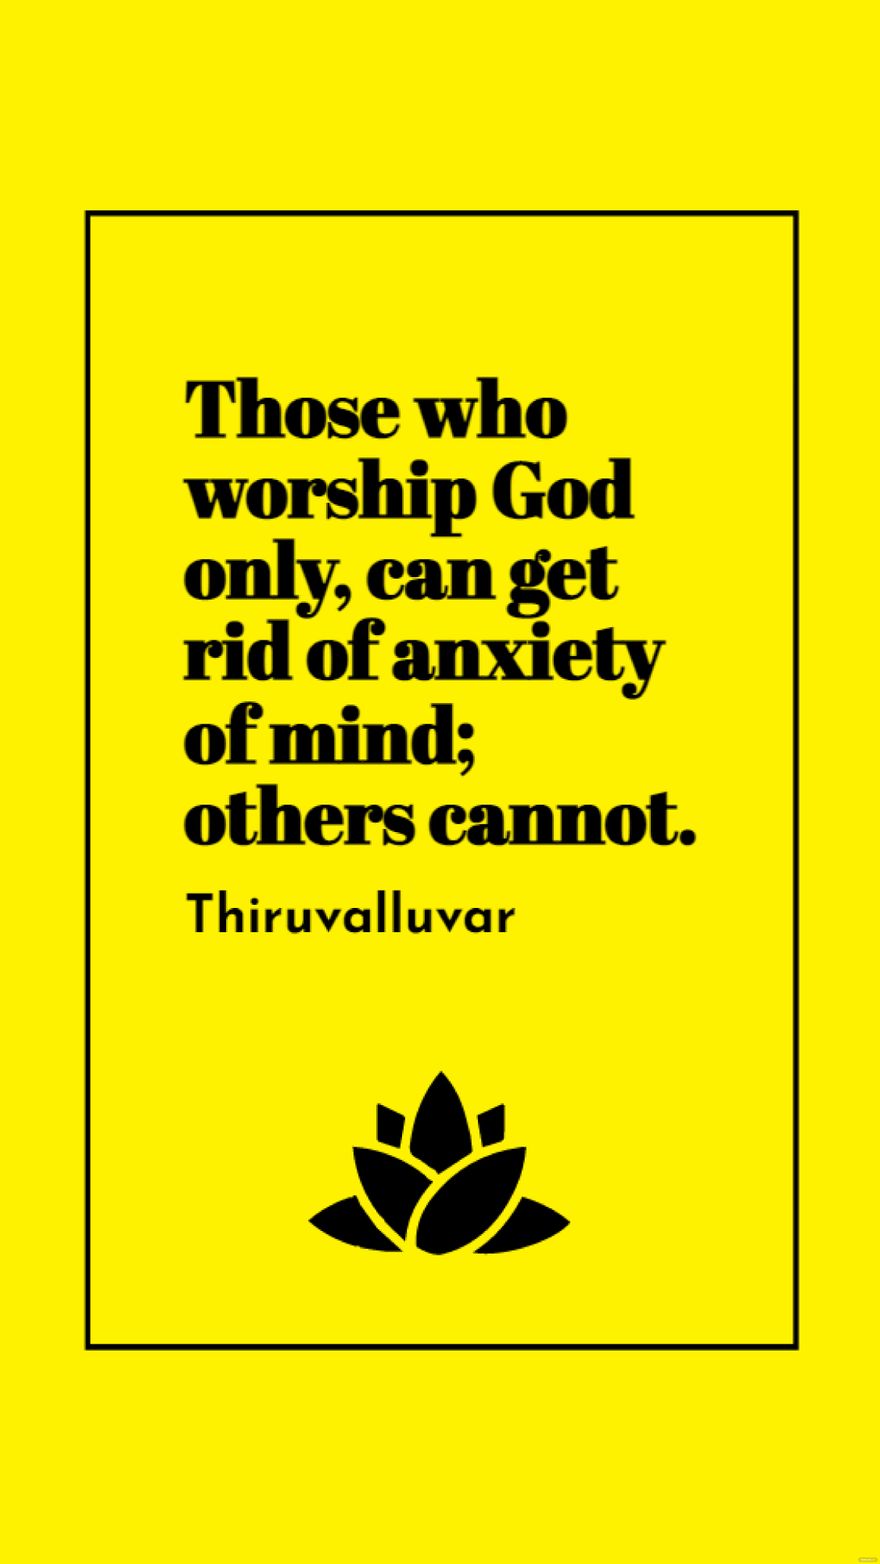 Free Thiruvalluvar - Those who worship God only, can get rid of anxiety of mind; others cannot. in JPG